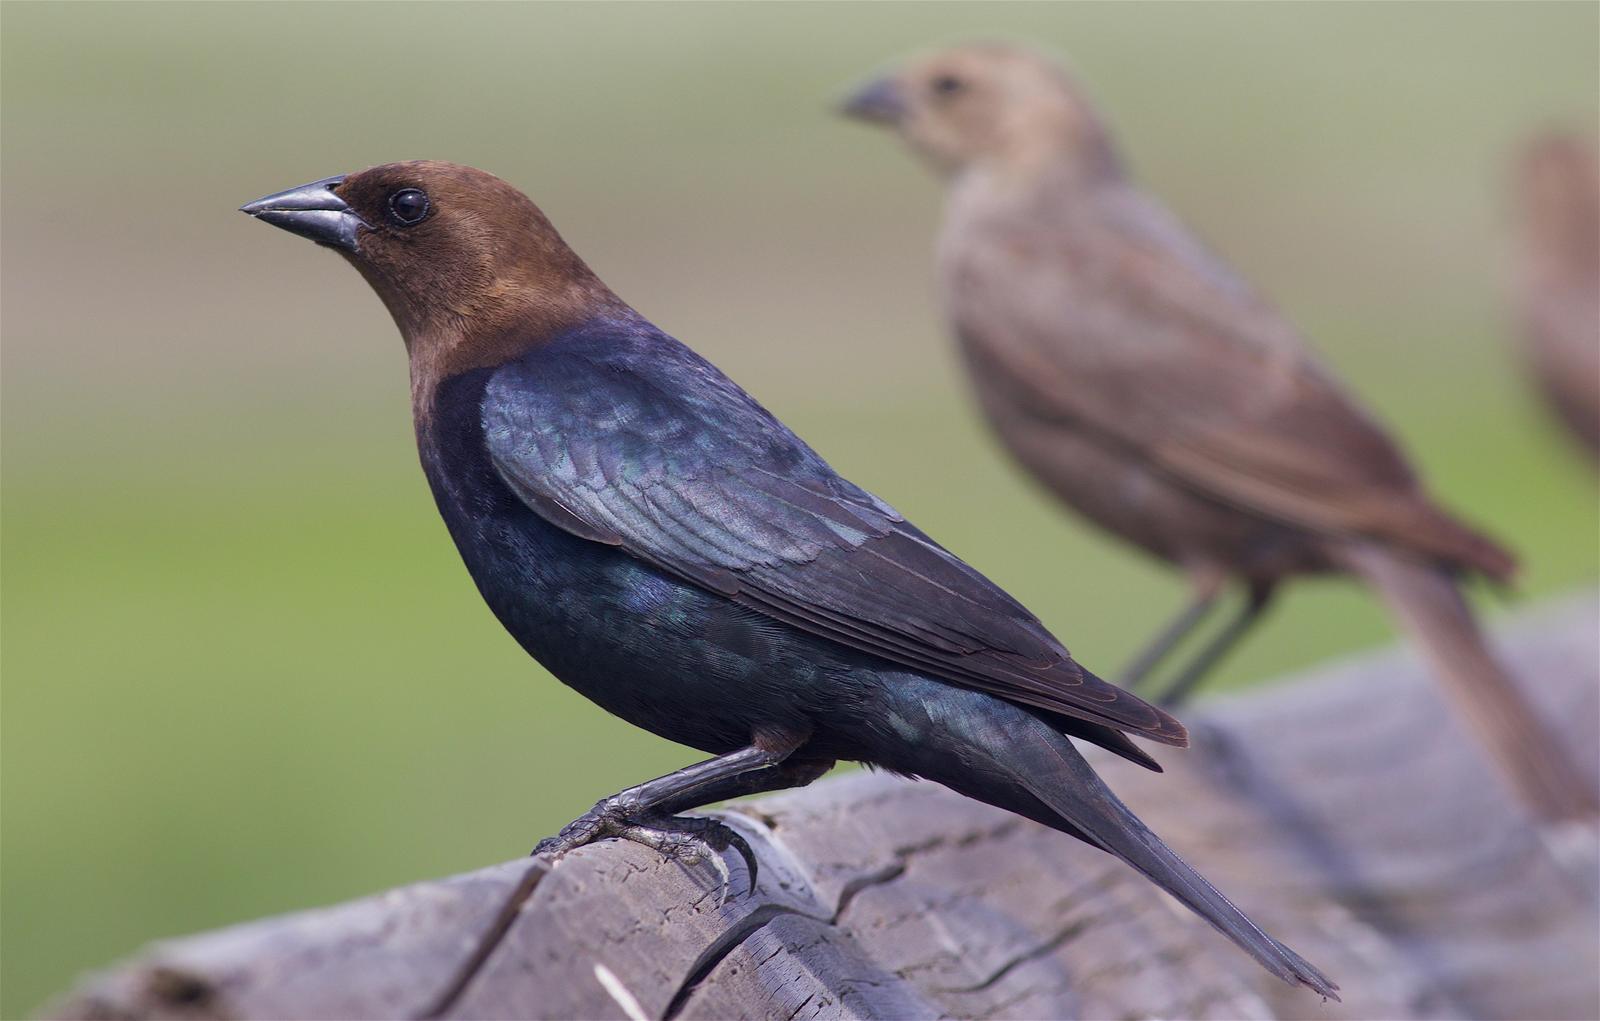 Brown-headed Cowbird Photo by Kathryn Keith